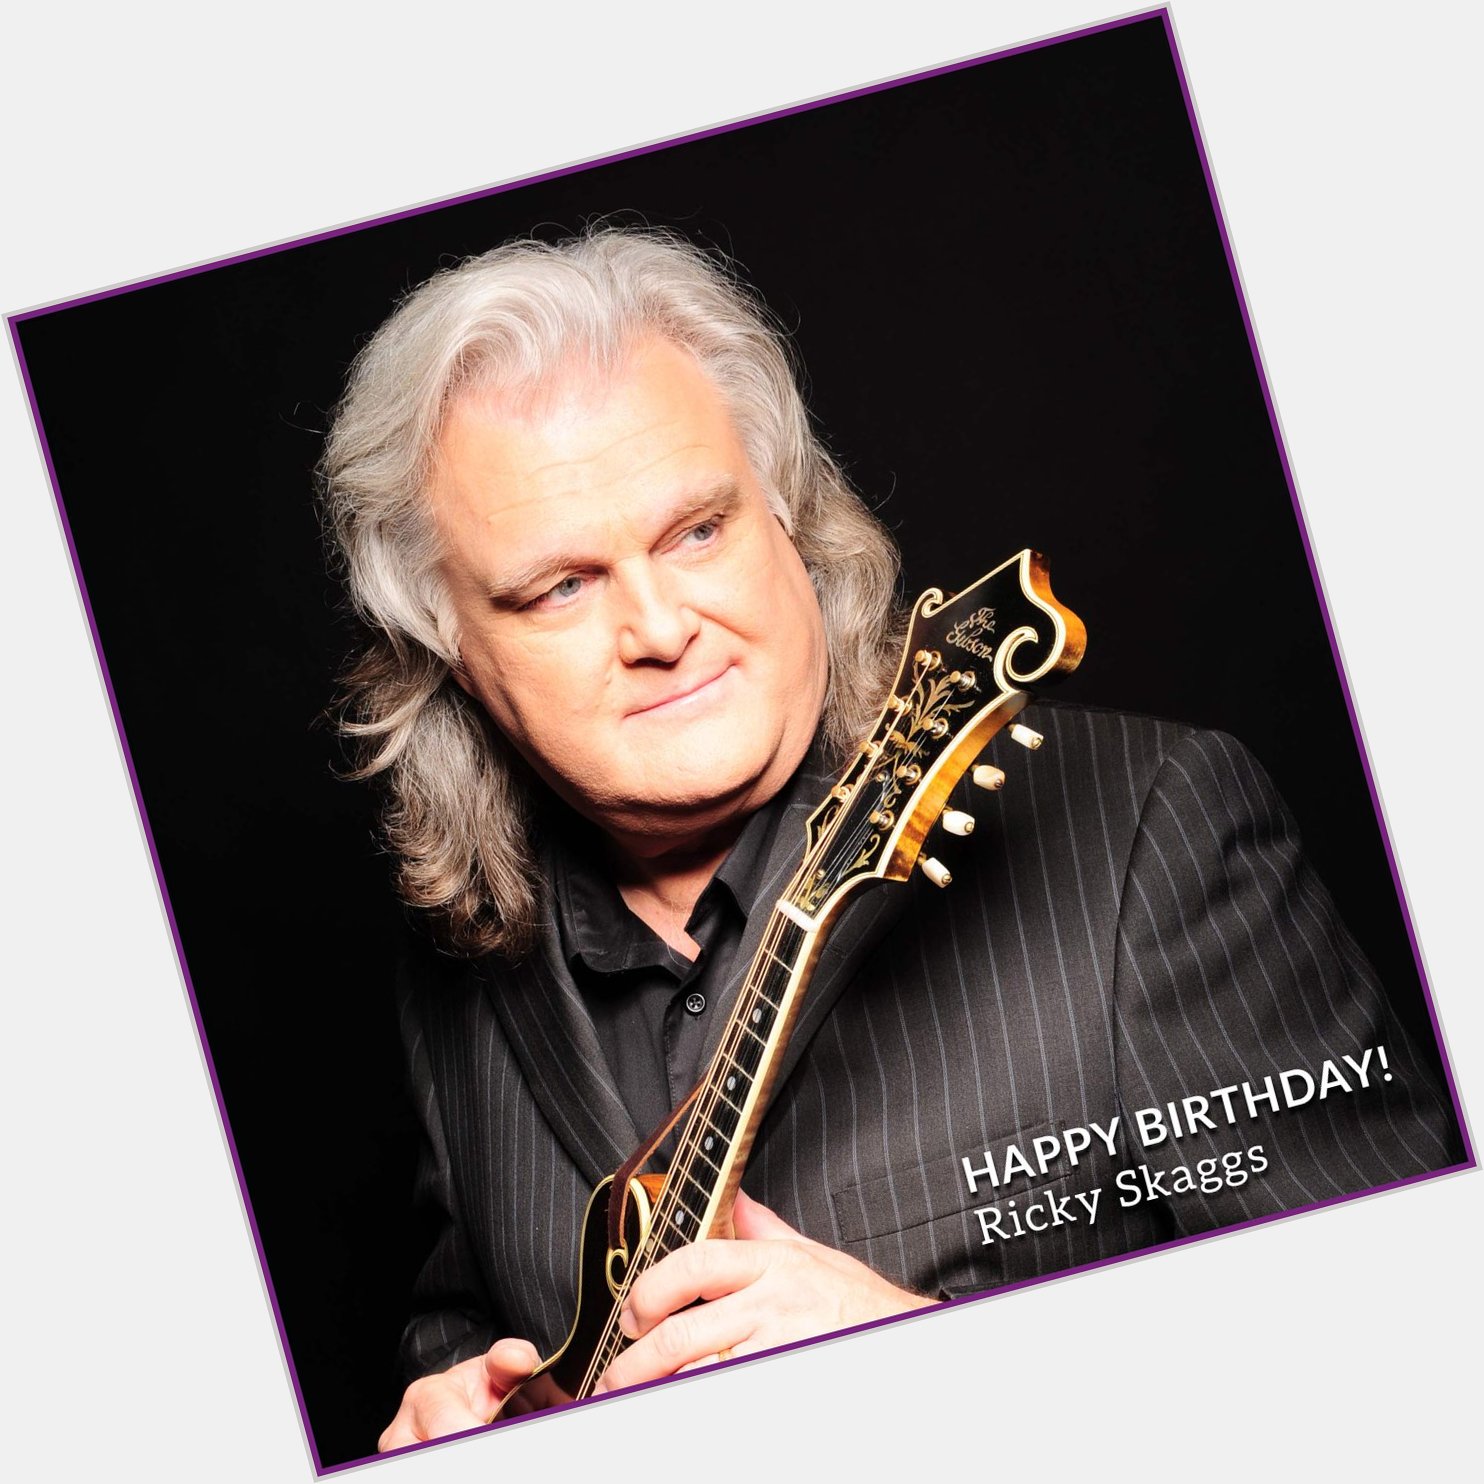 Happy Birthday to Ricky Skaggs!
What\s your favorite song from the legend?   